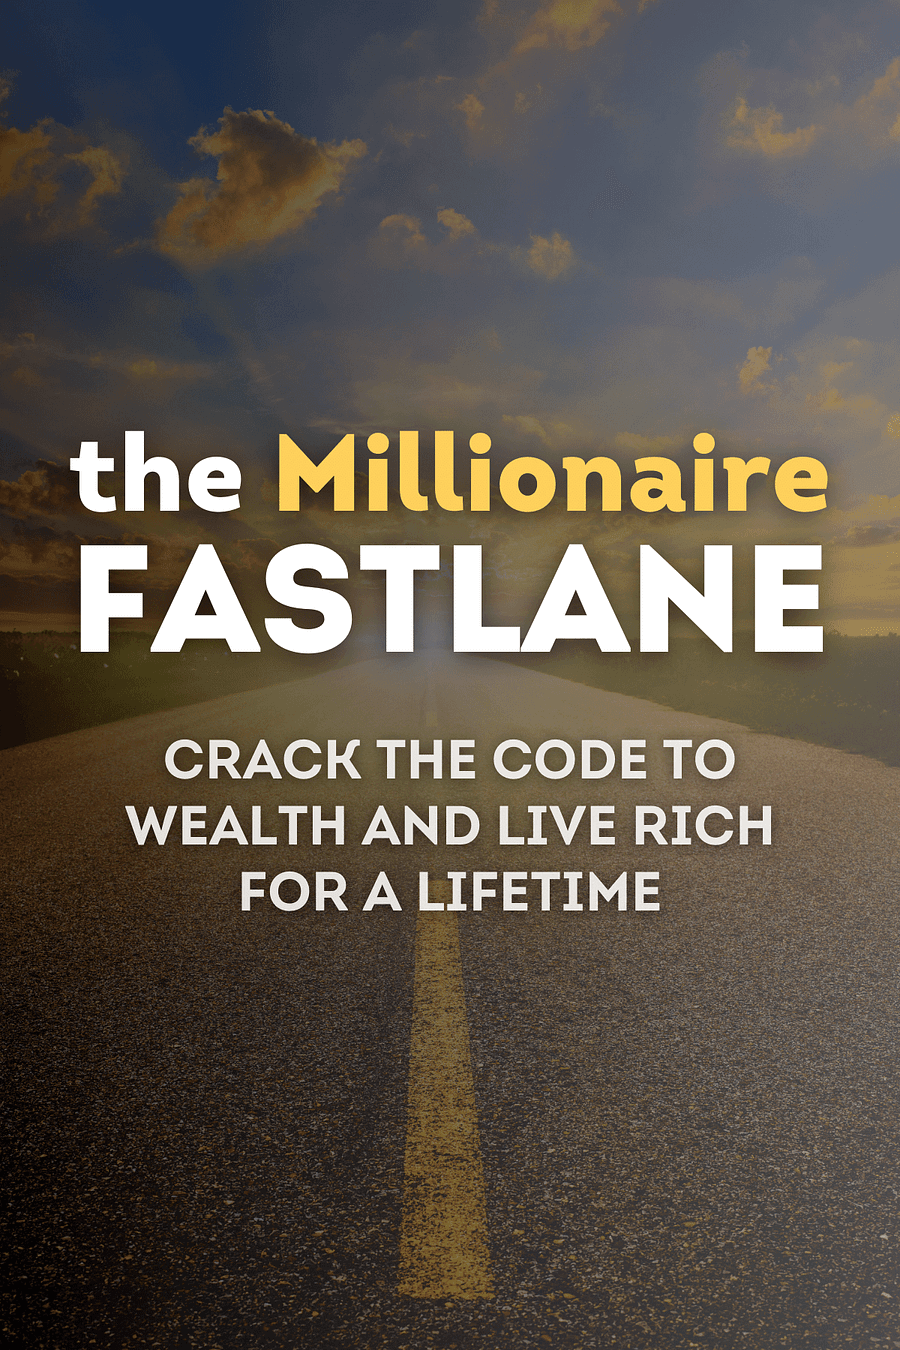 The Millionaire Fastlane by MJ DeMarco - Book Summary